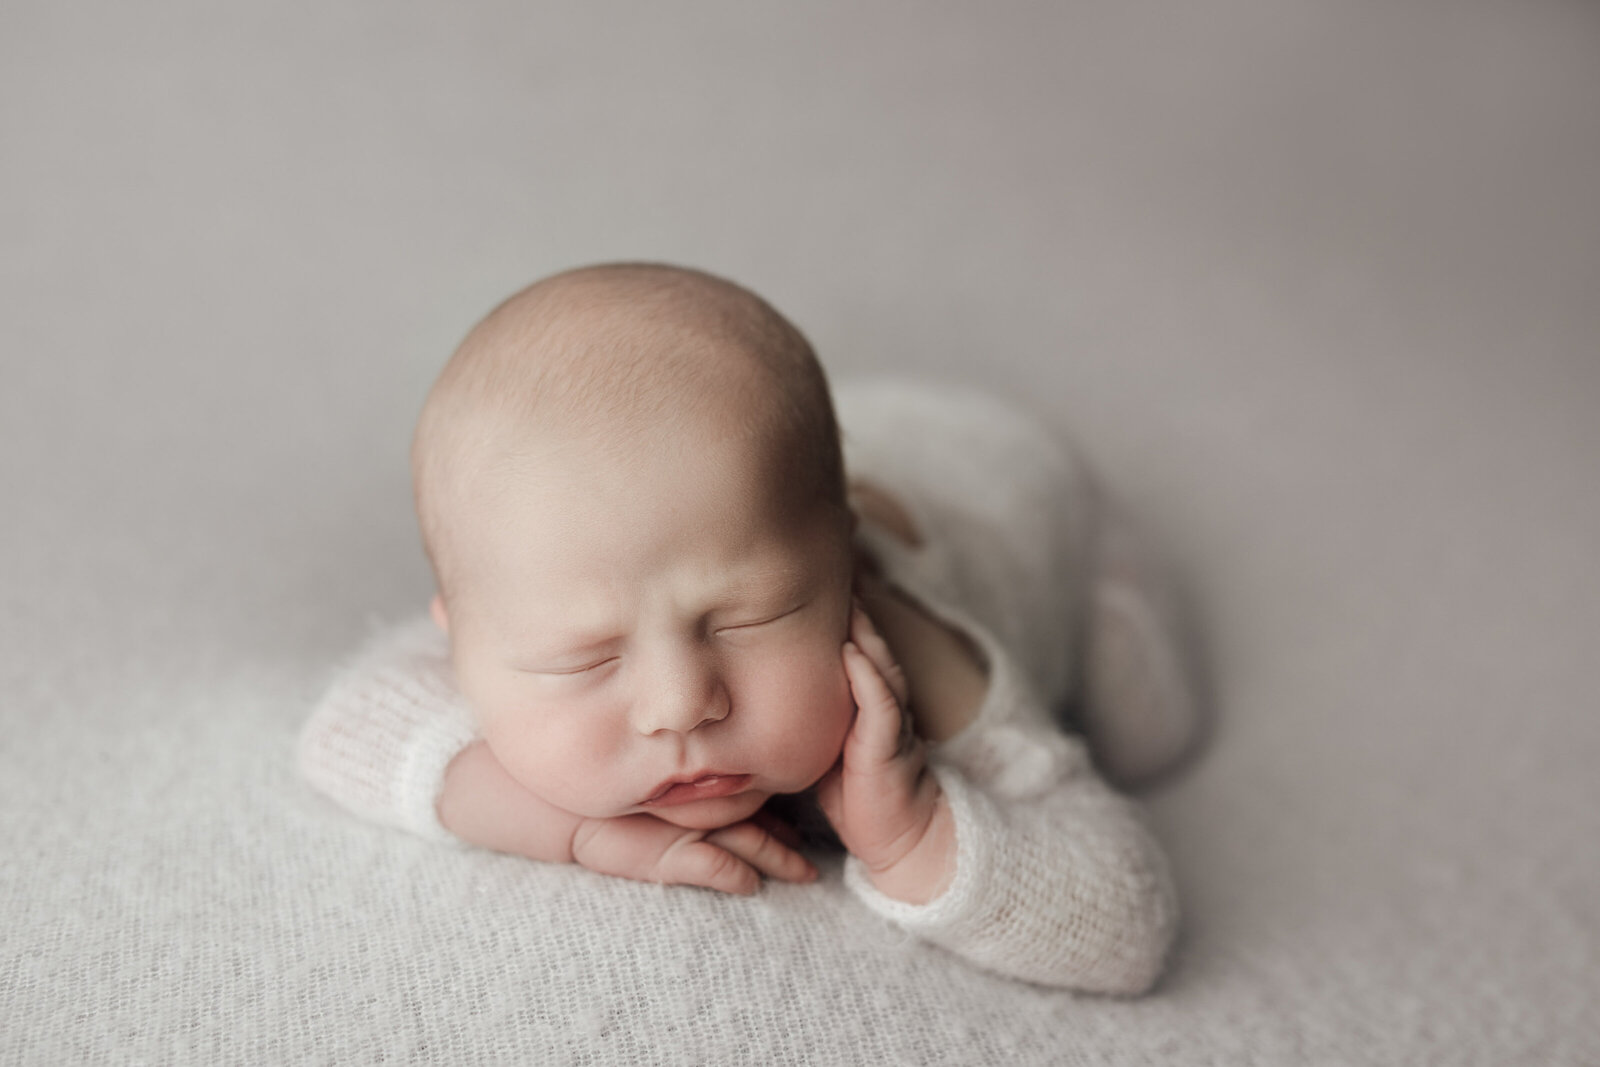 Posed newborn photoshoot in London Ontario. Baby waring a cream knit onesie lying on his belly on matching cream blanket. Baby's right hand is under his chin and the left hand is gently touching his cheek.